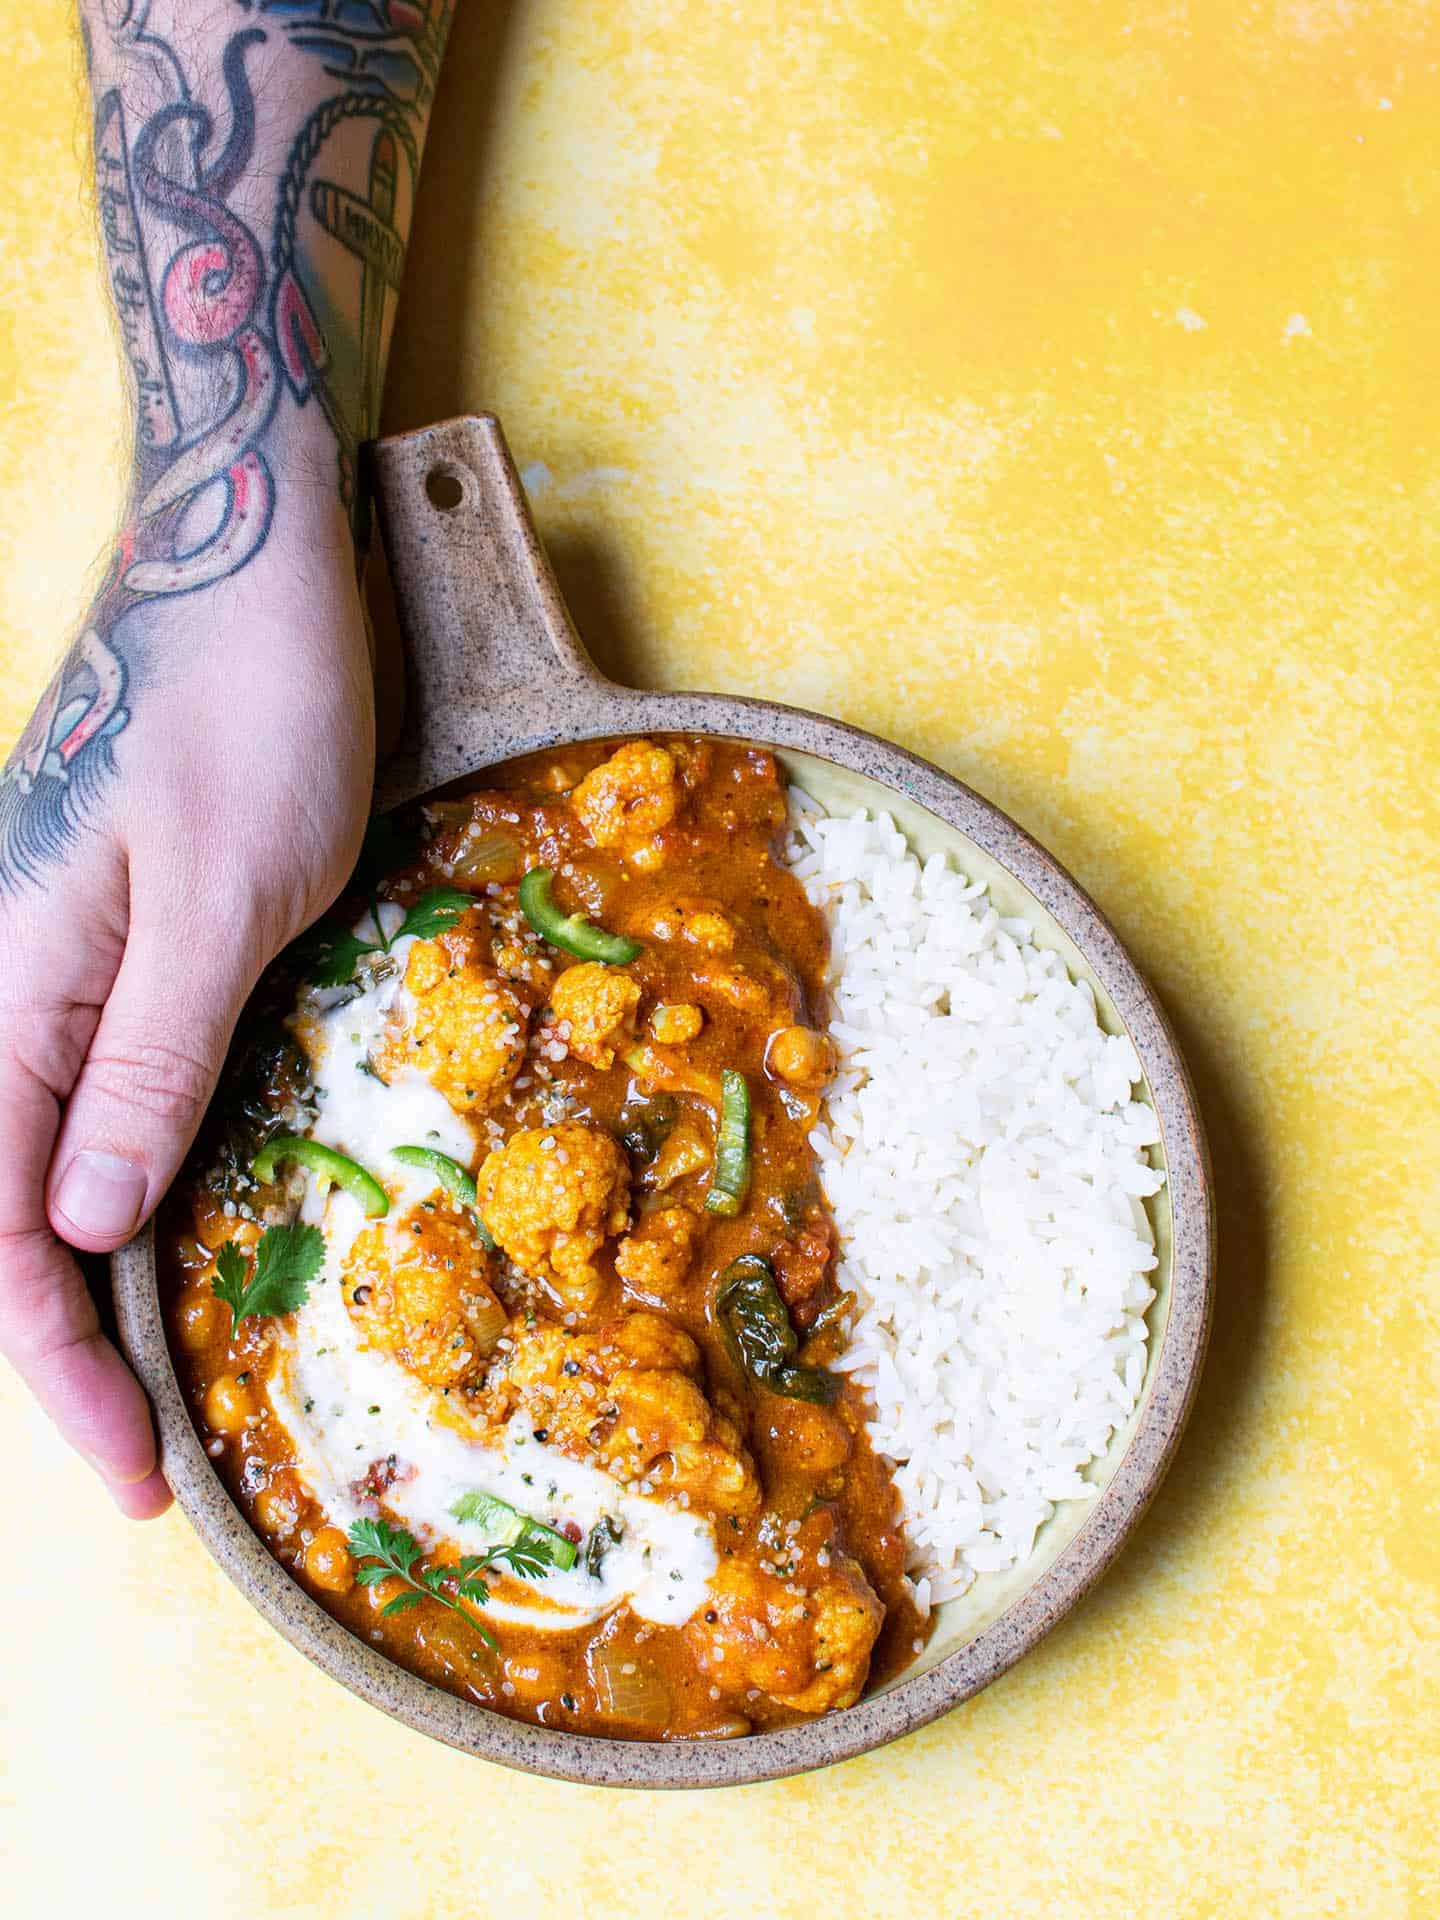 Vegan cauliflower curry in a bowl with a tattooed arm about to pick it up